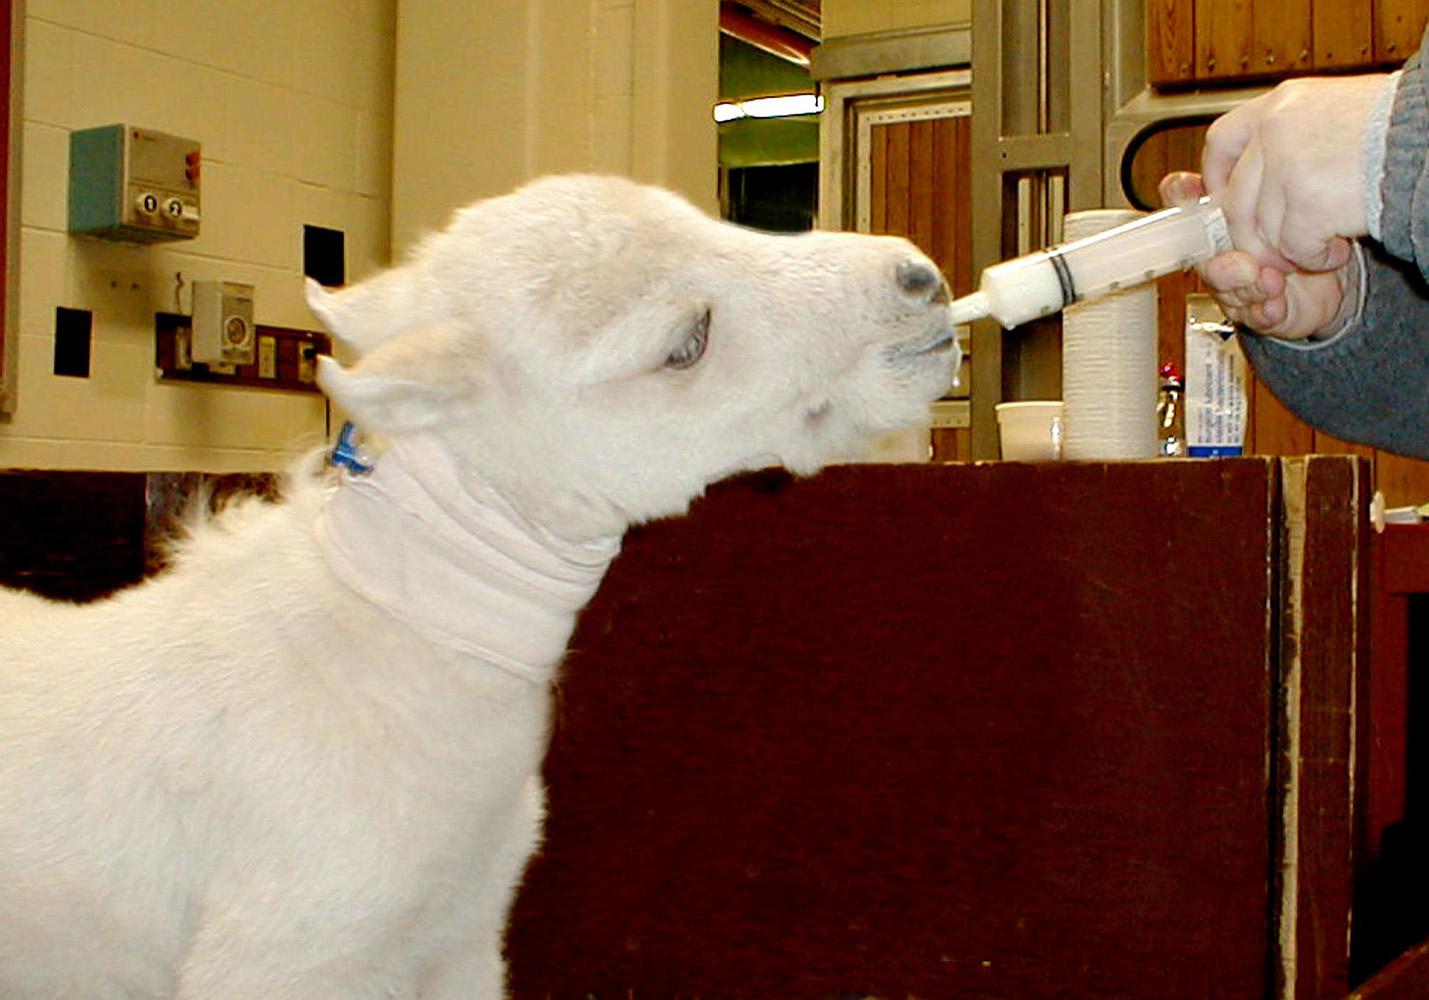 This orphaned, premature miniature horse named Miracle enjoys a bottle-fed meal on March 2, 2003, from the hands of Dr. Katie McGahee, an equine resident at Mississippi State University's College of Veterinary Medicine in Starkville, Miss. Veterinary students and faculty stayed by Miracle's side during his two-week stay, administering his food, medicine and physical therapy. (Photo by Dawn Tucker/AP/MSU)